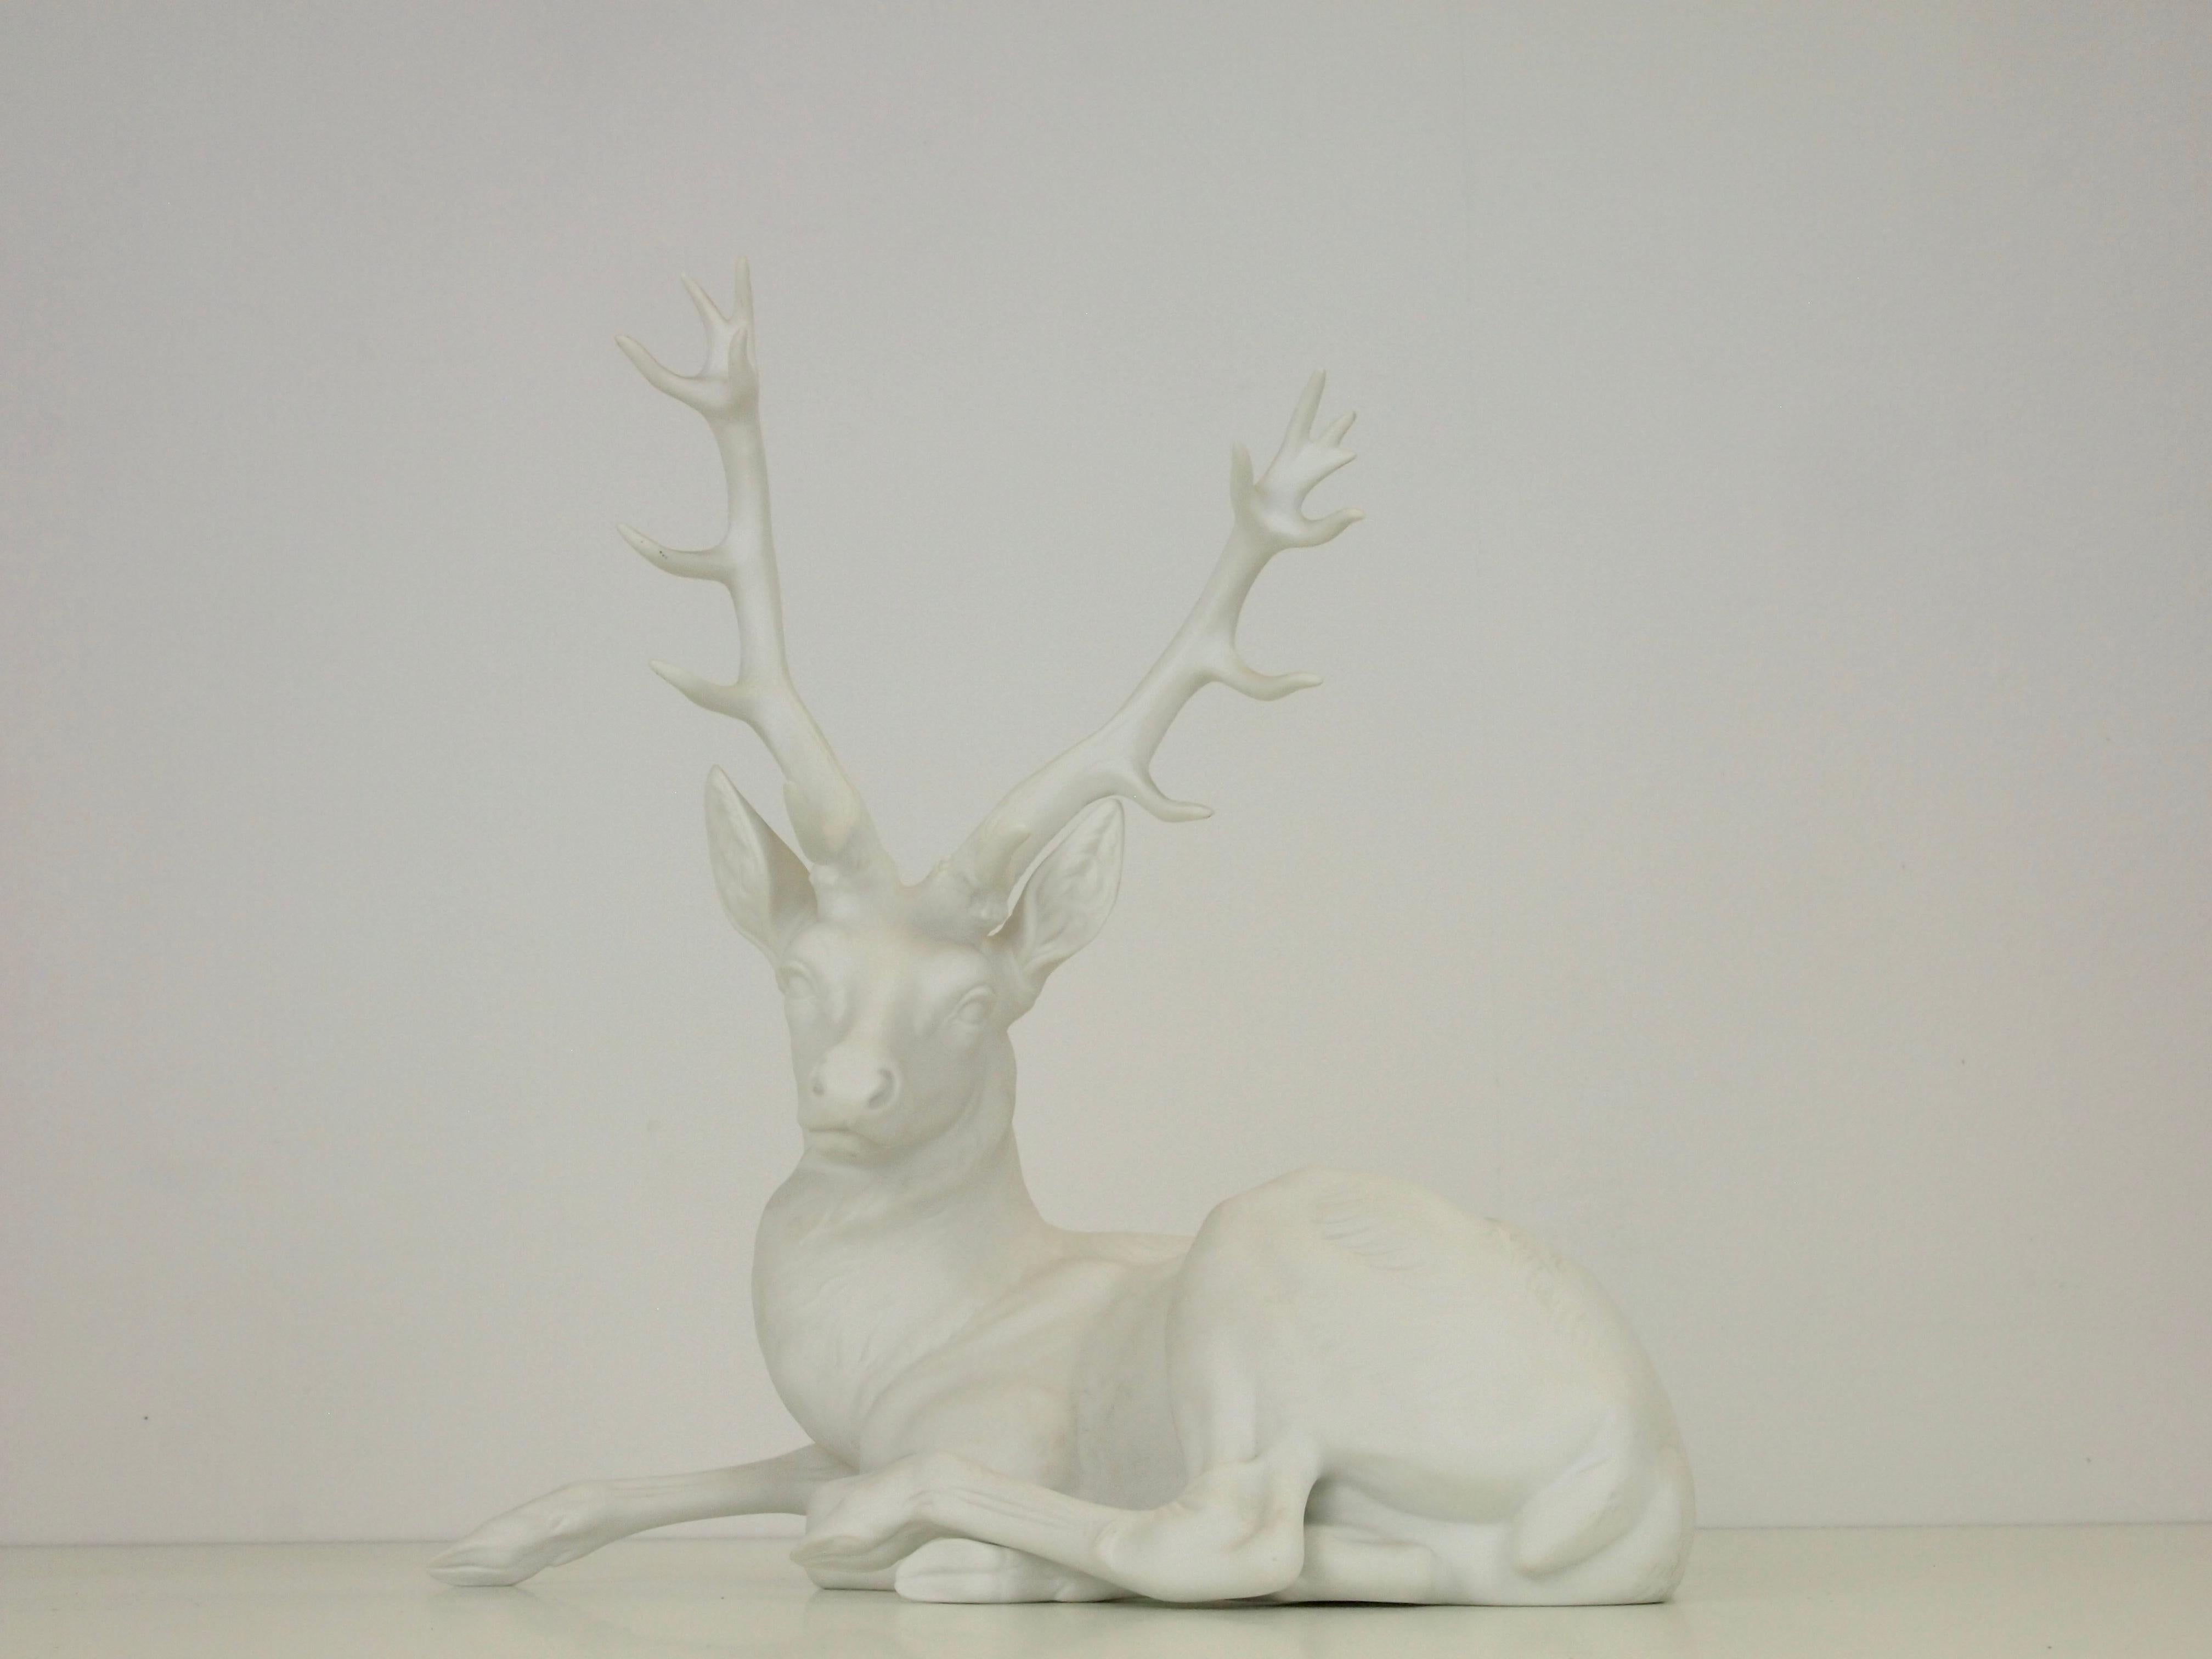 Vintage biscuit porcelain statuette depicting a lying red deer by Nymphenburg Porzellan Manufaktur.
The statuette has been designed by August Gohring who started to be the modelleur for the manufactury in 1914.

This amazing and rare Nymphenburg